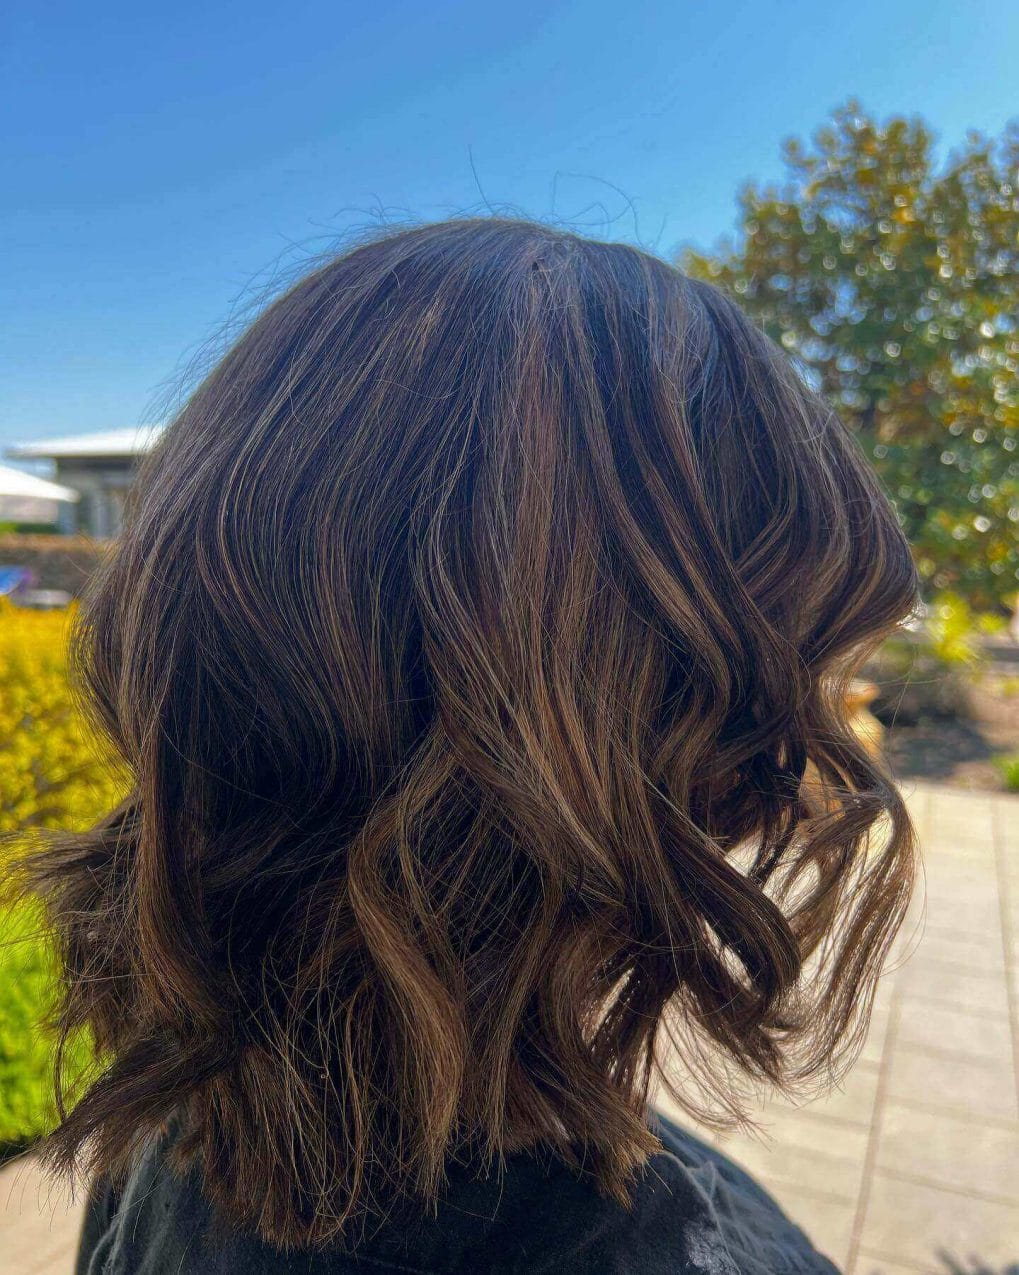 Soft bouncy waved bob with layered warm browns and honey highlights.